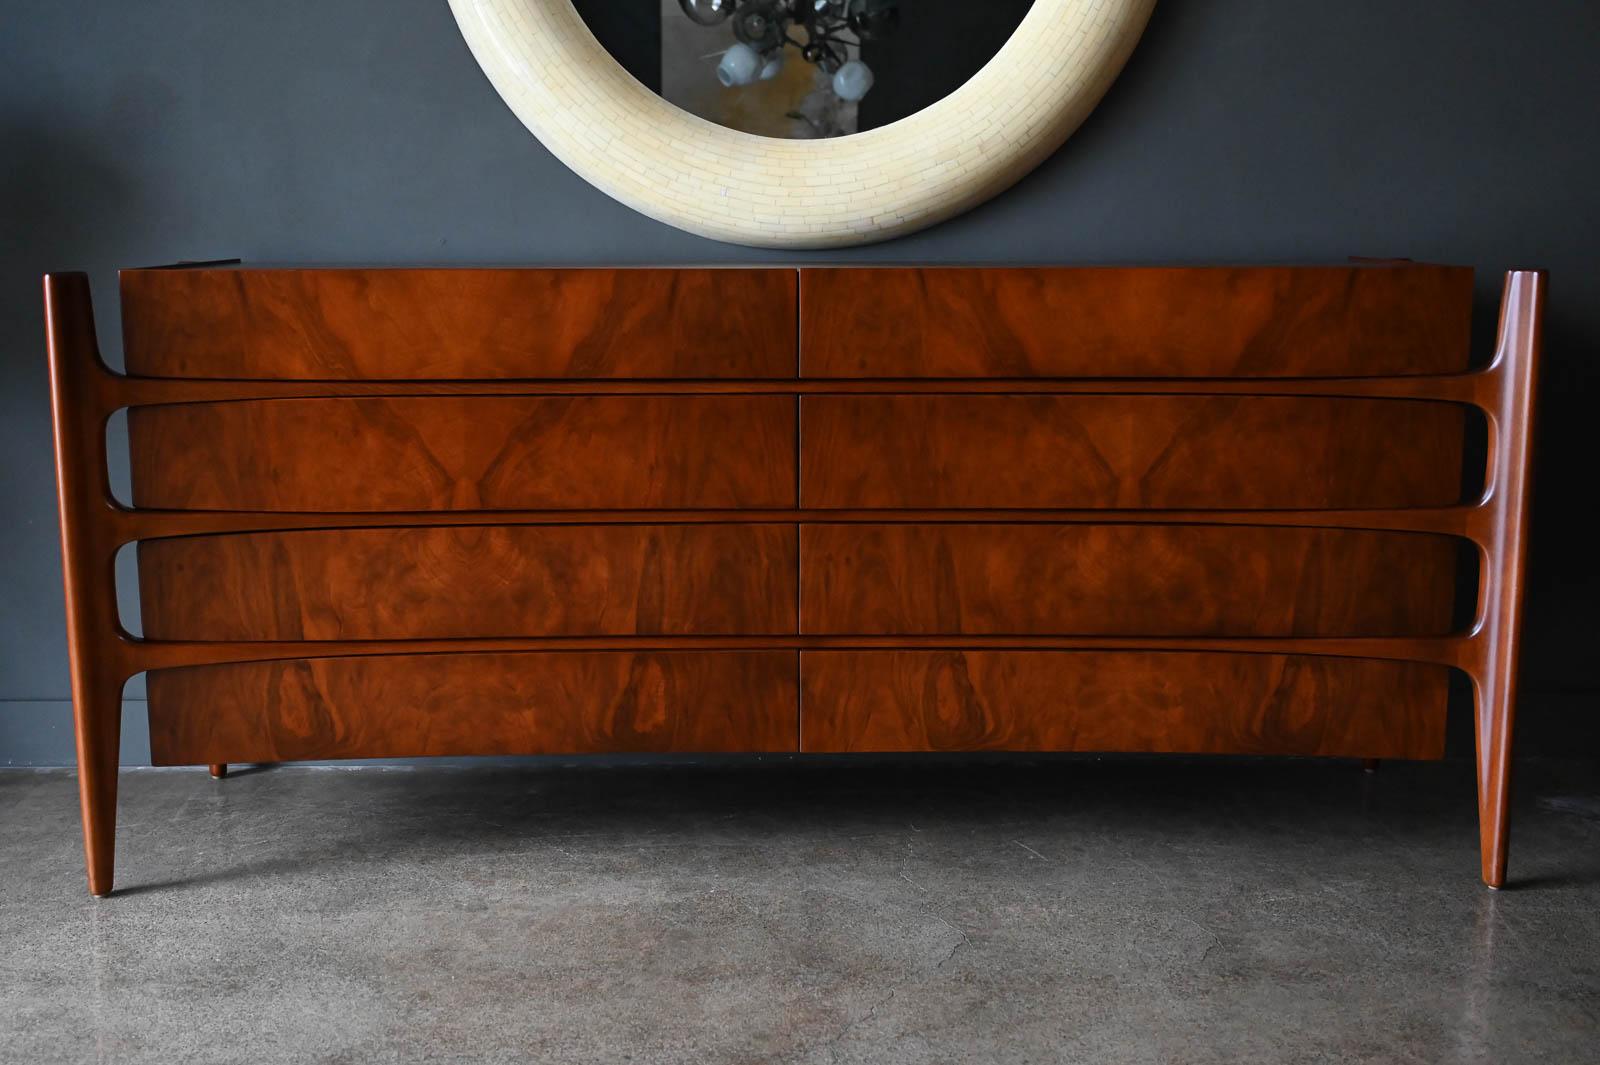 Walnut Sculpted Dresser or Credenza by William Hinn, ca. 1960. Beautiful dresser or credenza with fantastic walnut grain and sculpted legs and frame. Professionally restored in showroom condition, these pieces rarely come to market and this is one